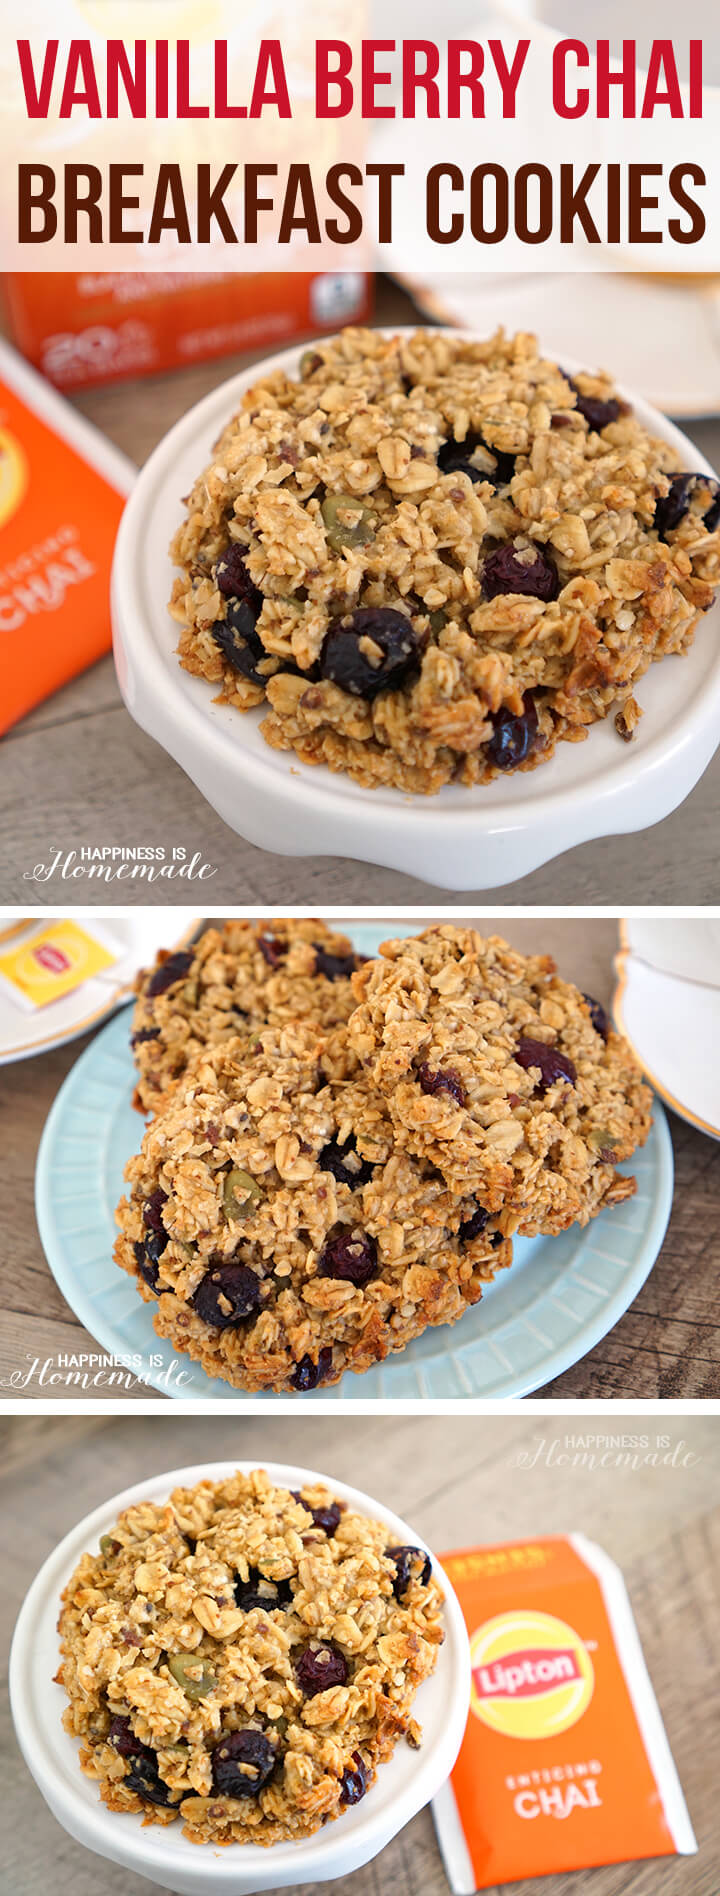 Vanilla Berry Chai Breakfast Cookies are a Healthy On-the-Go Meal